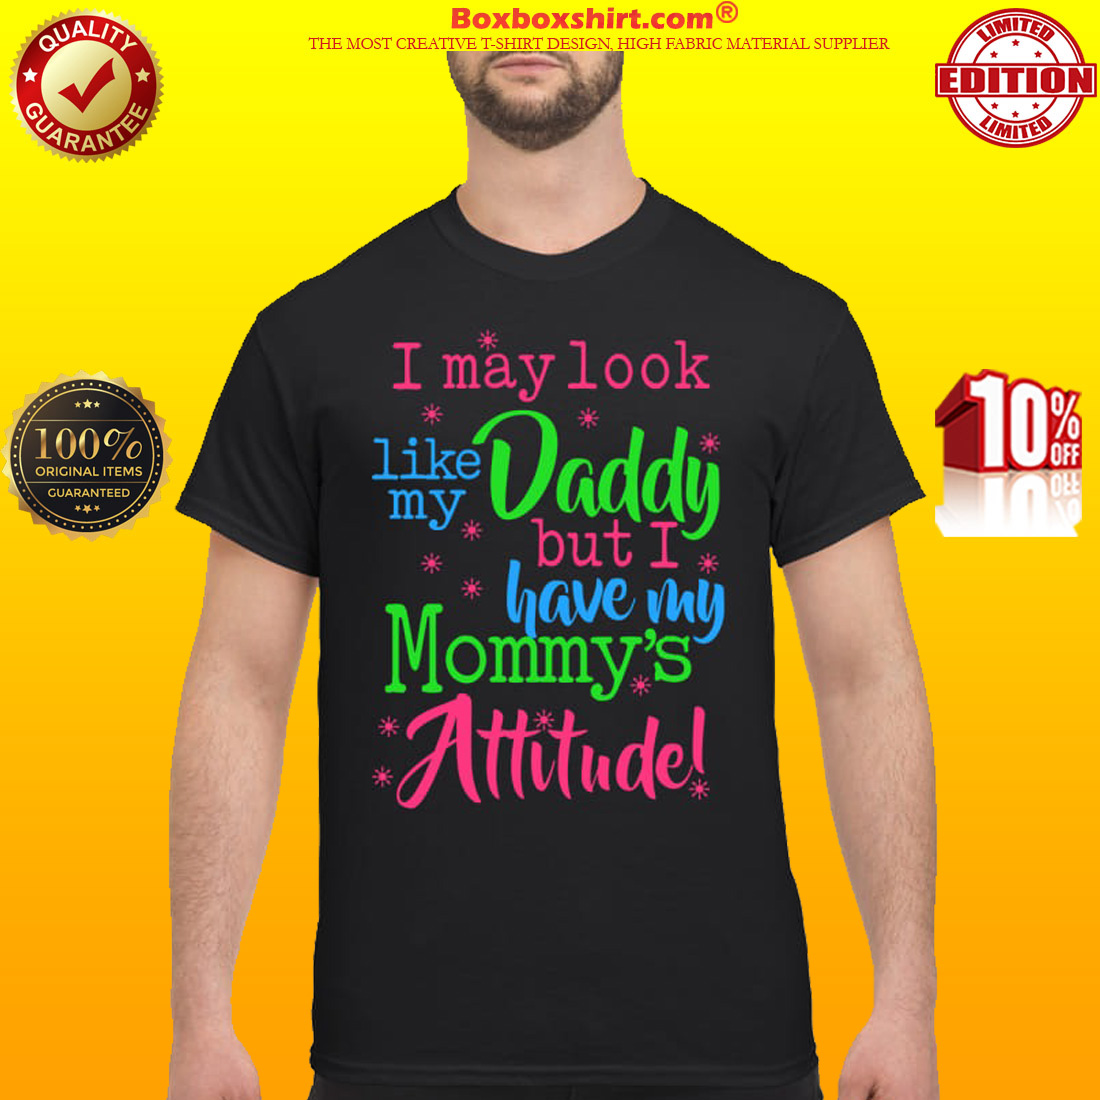 I may look like my daddy but I have my mommy's attitude classic shirt